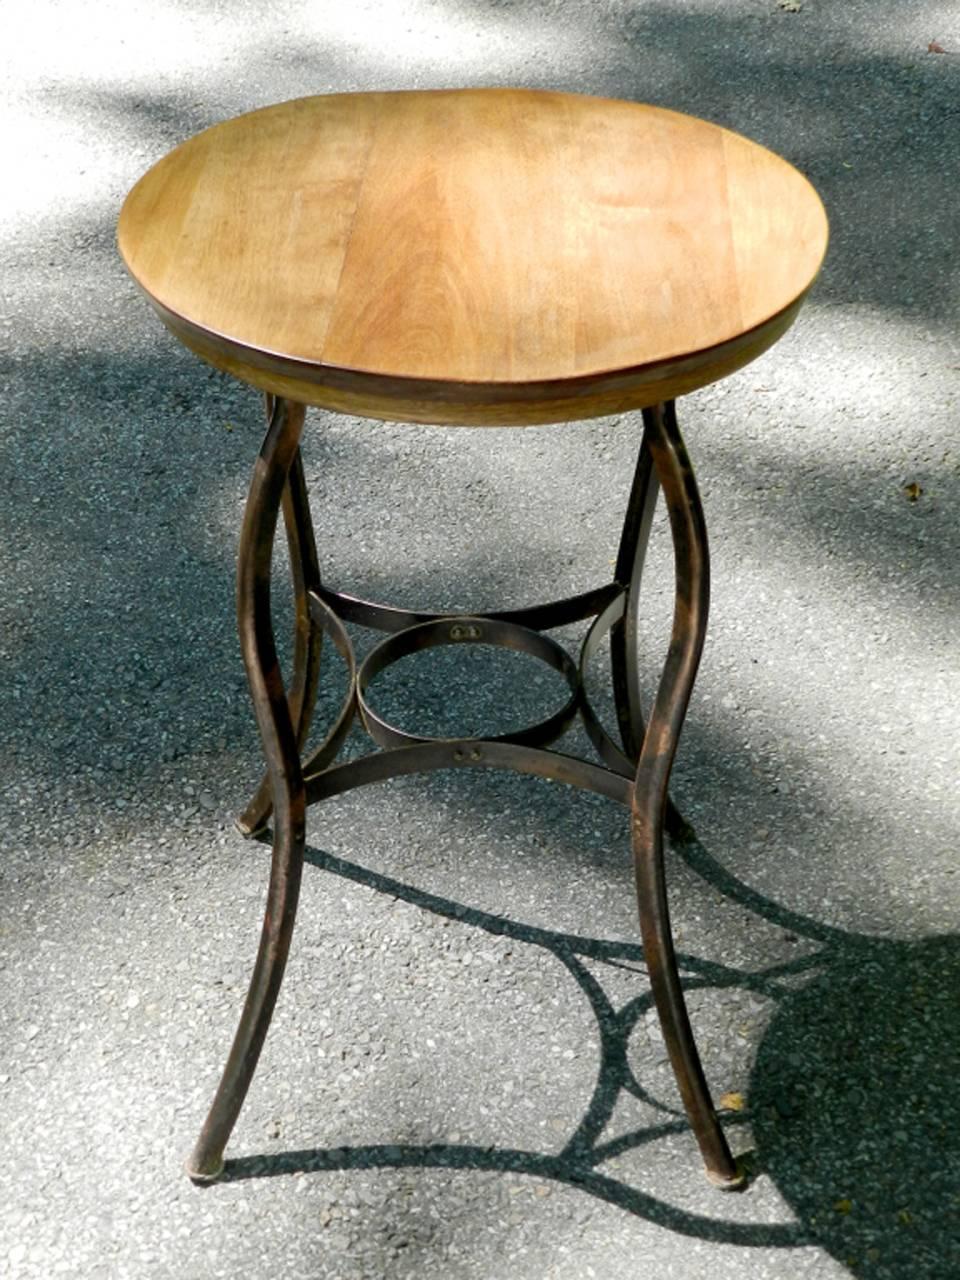 Industrial Small End Table, Original Japanned Copper Finish